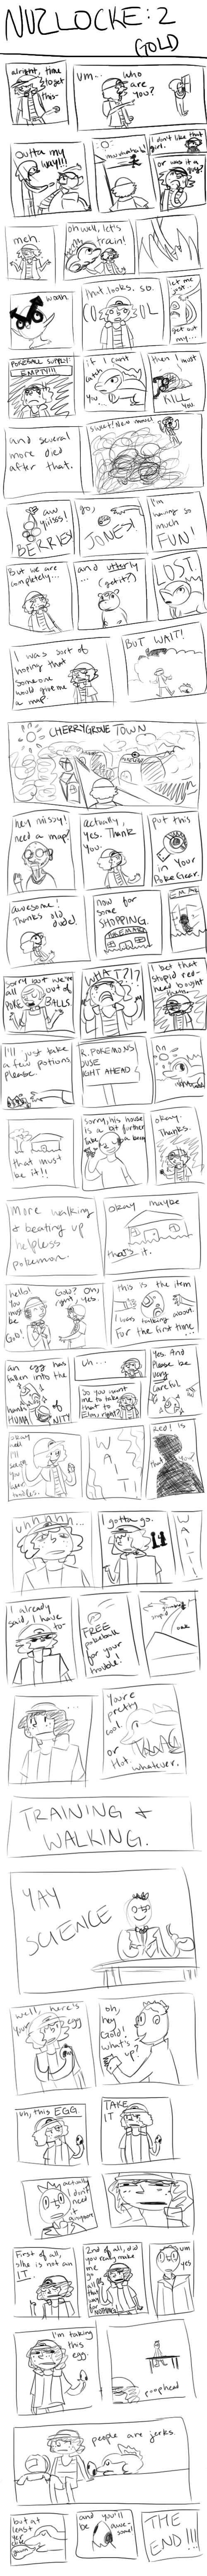 nuzlocke__gold_p2_by_aggielexi-d5jd20e.png